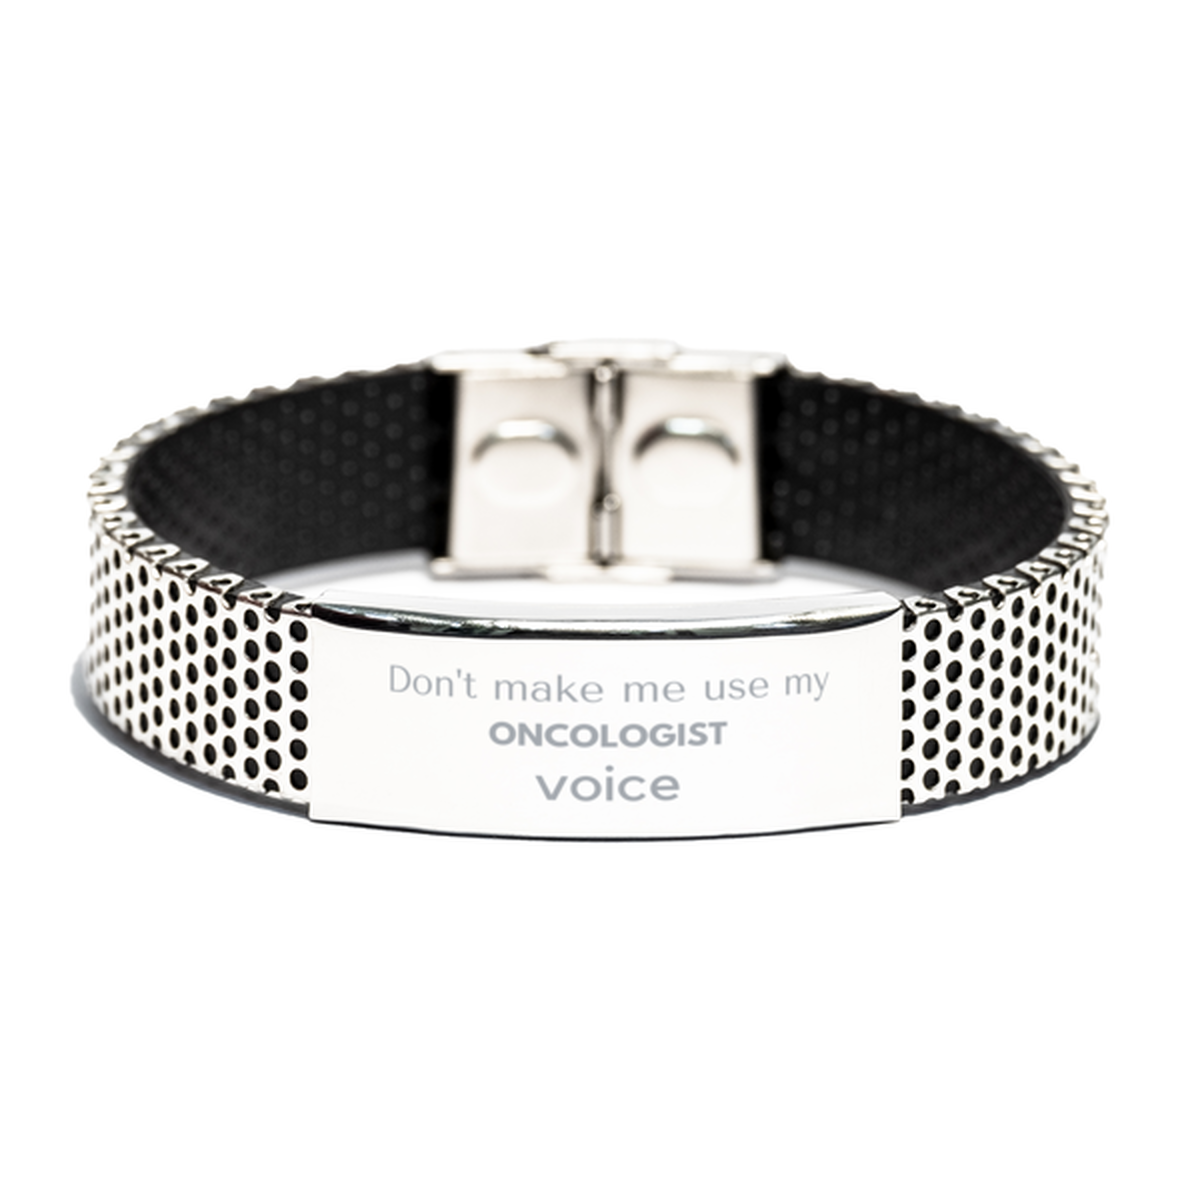 Don't make me use my Oncologist voice, Sarcasm Oncologist Gifts, Christmas Oncologist Stainless Steel Bracelet Birthday Unique Gifts For Oncologist Coworkers, Men, Women, Colleague, Friends